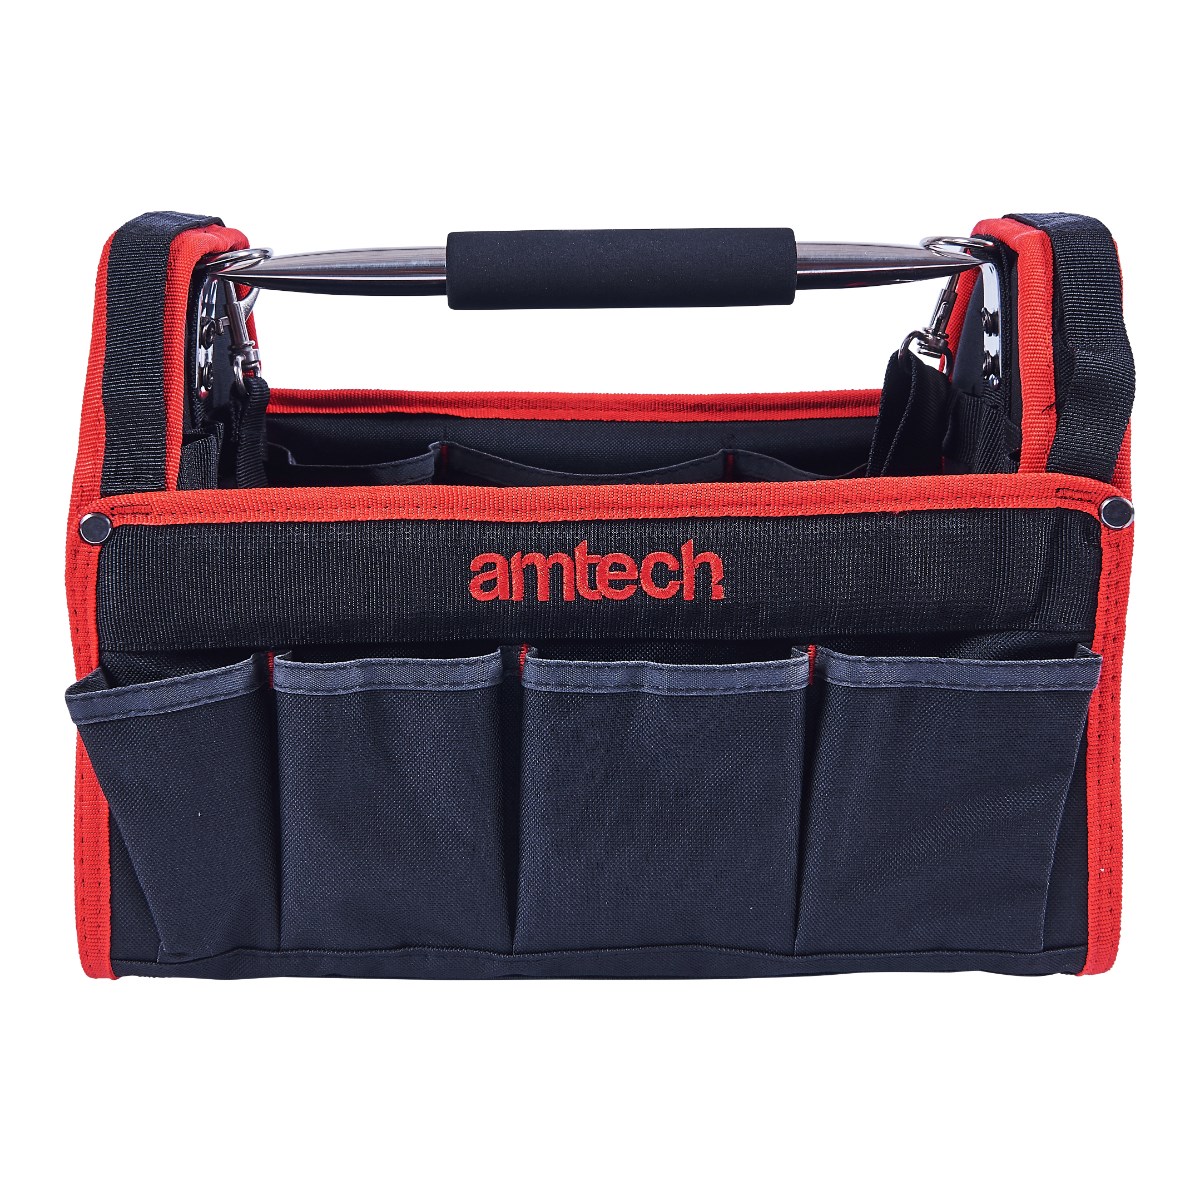 Tool Caddy Tote Bag Heavy Duty Base Carry Case Holdall 18'' Amtech Electricians 